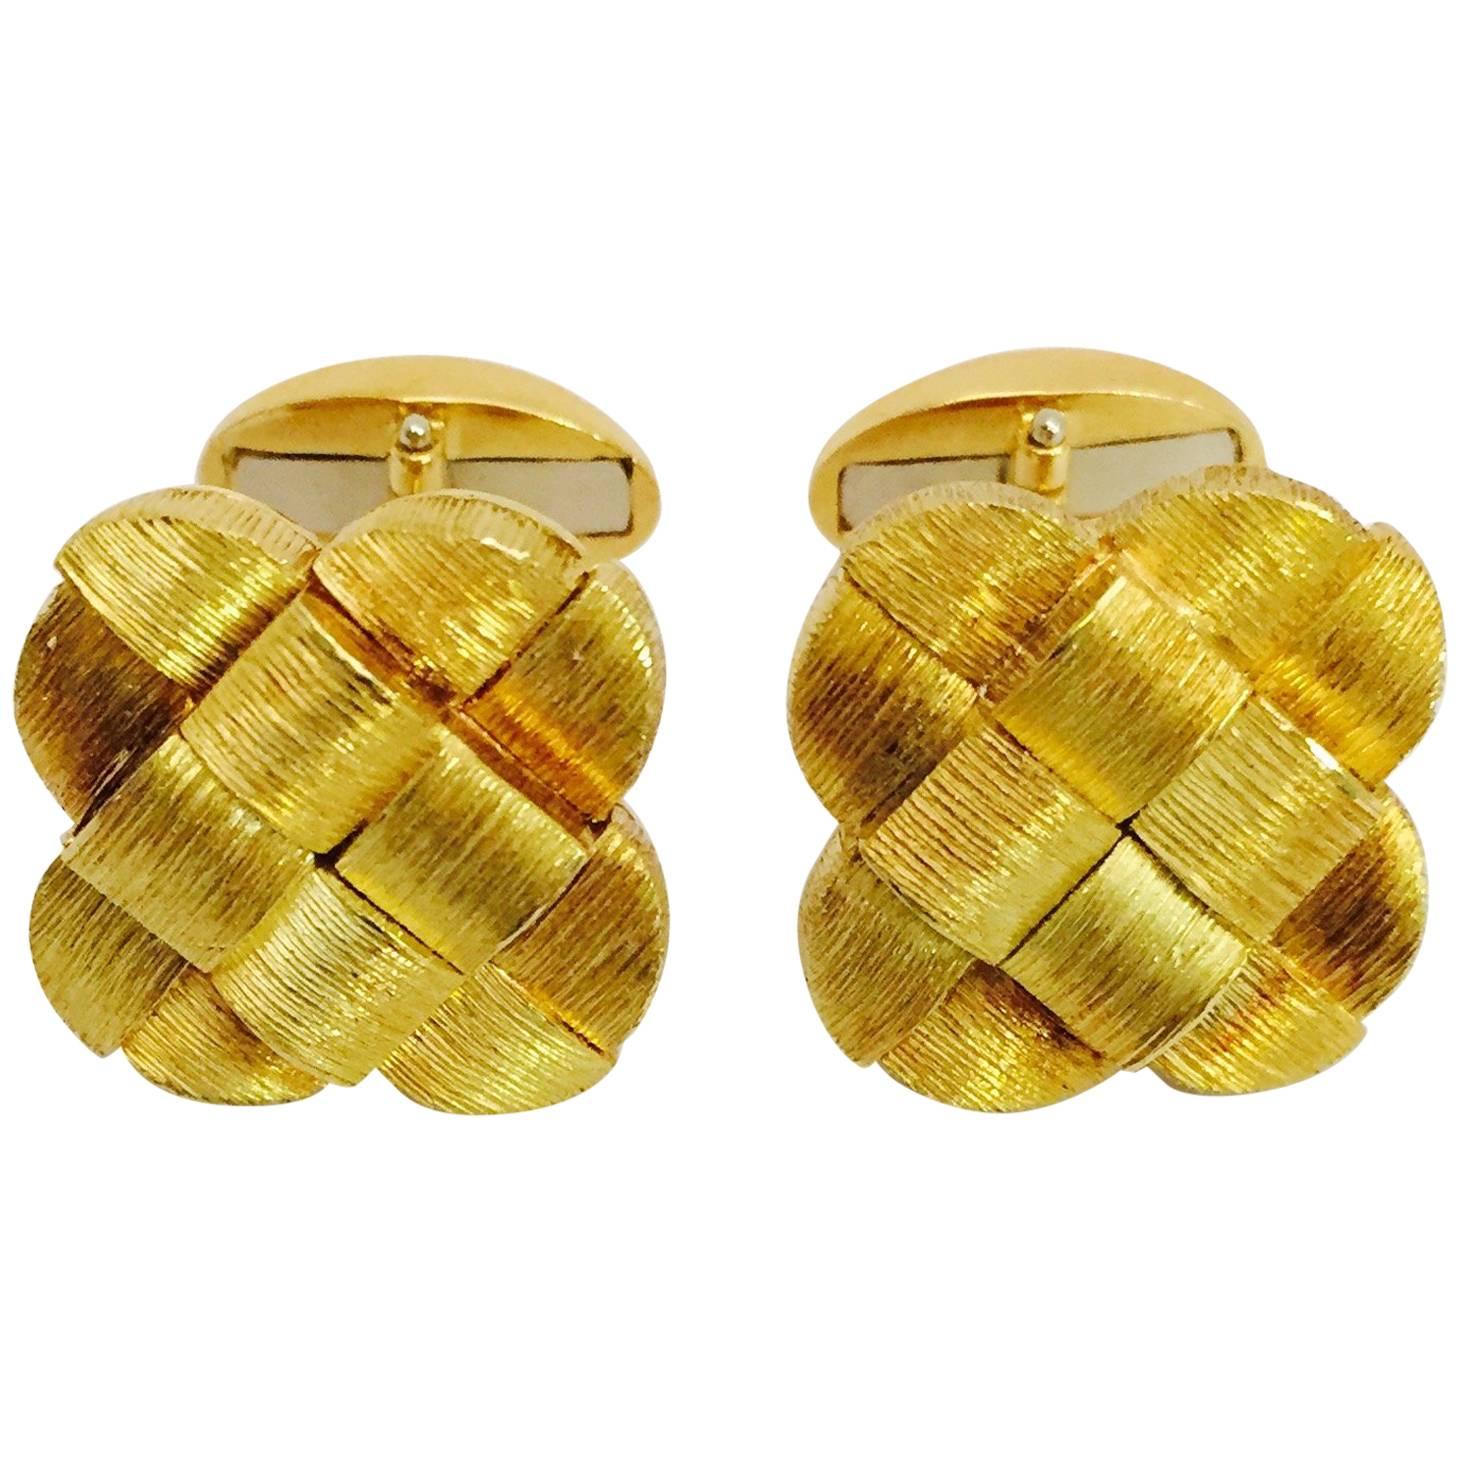 Handsome Henry Dunay Gold Woven Cufflinks